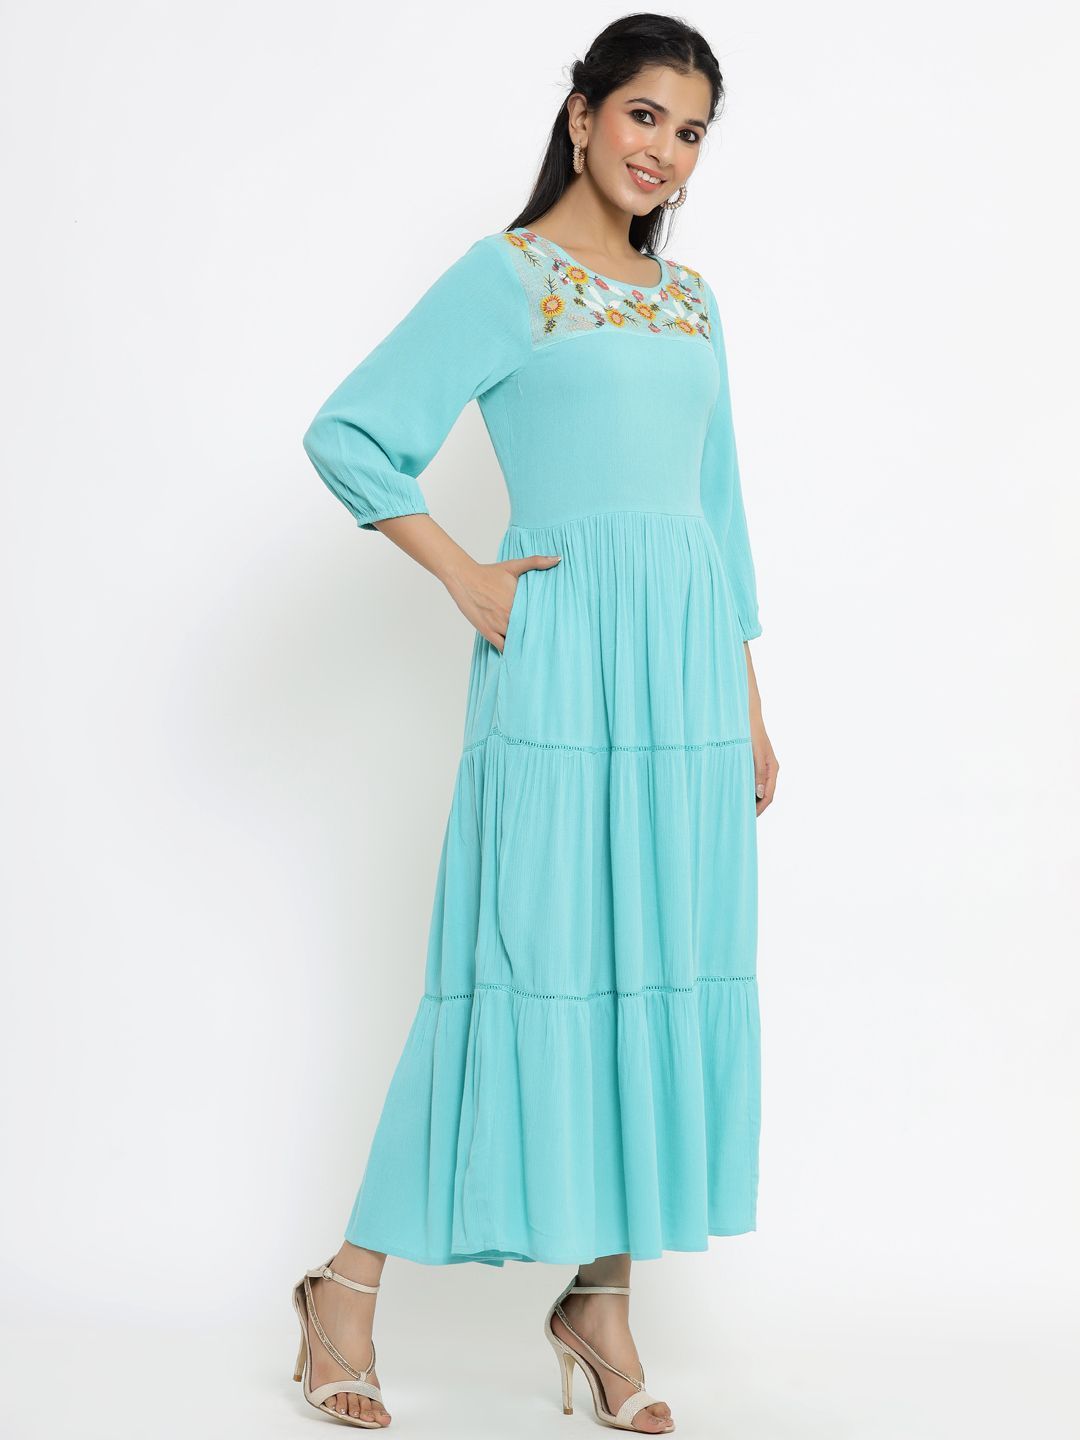 Women's Turq Rayon Crepe Embroidered Tiered Dress - Juniper